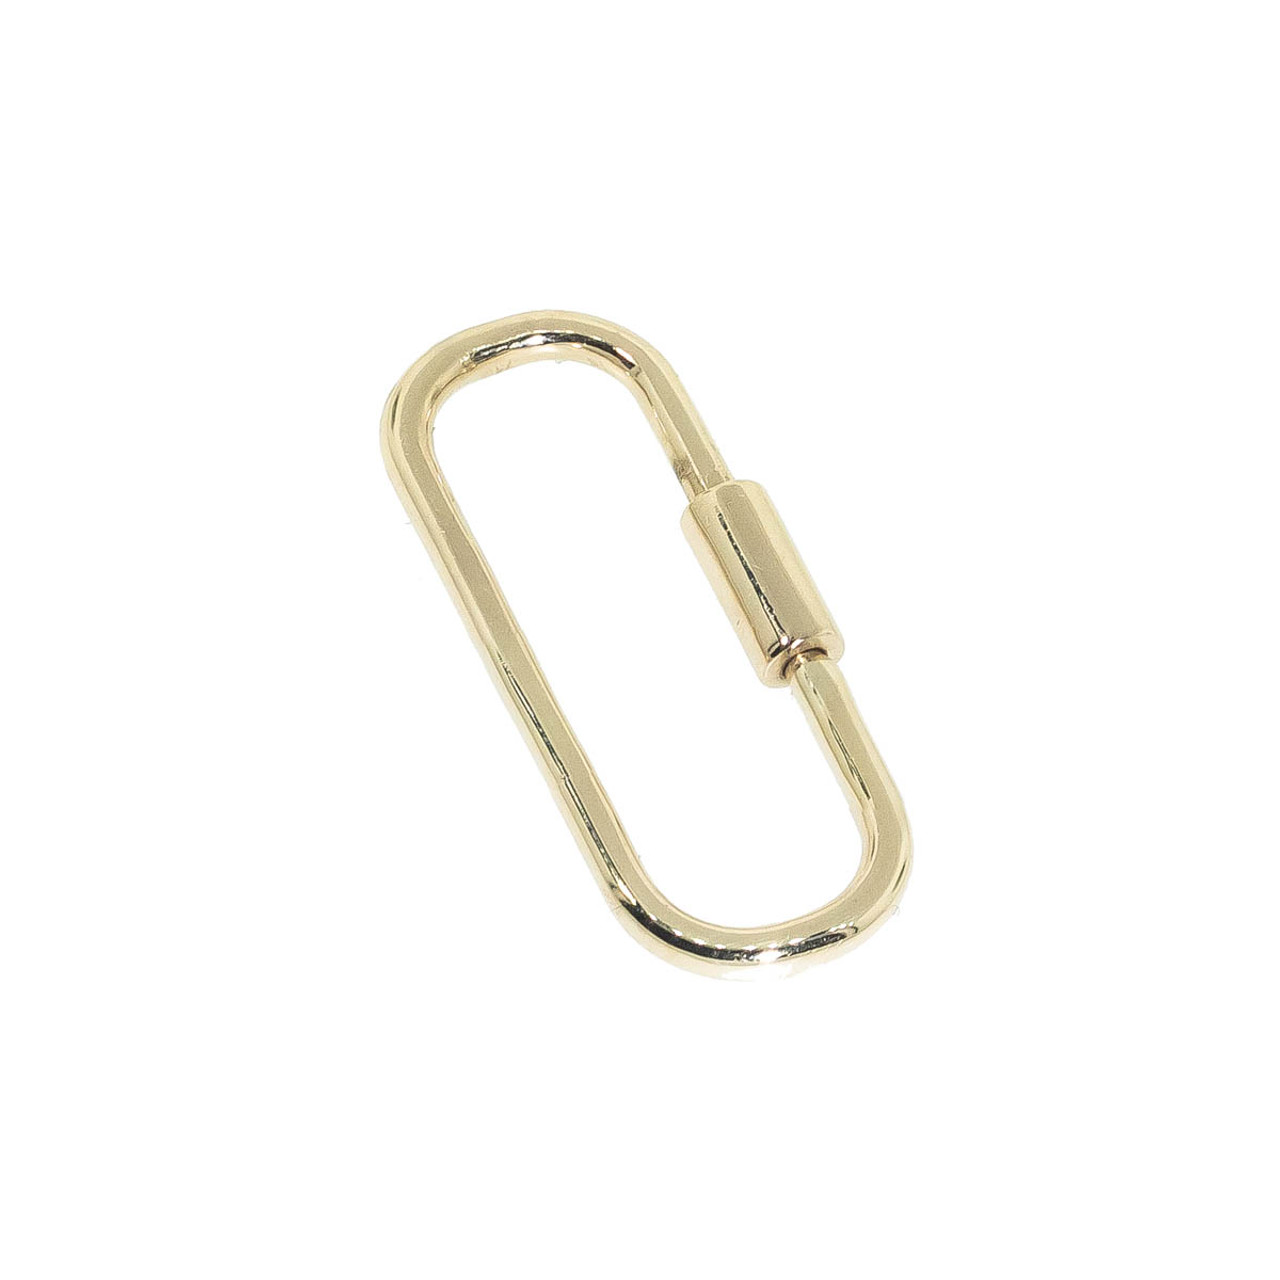 10x5.9mm 14K Yellow Gold Carabiner Type Spring Clasp